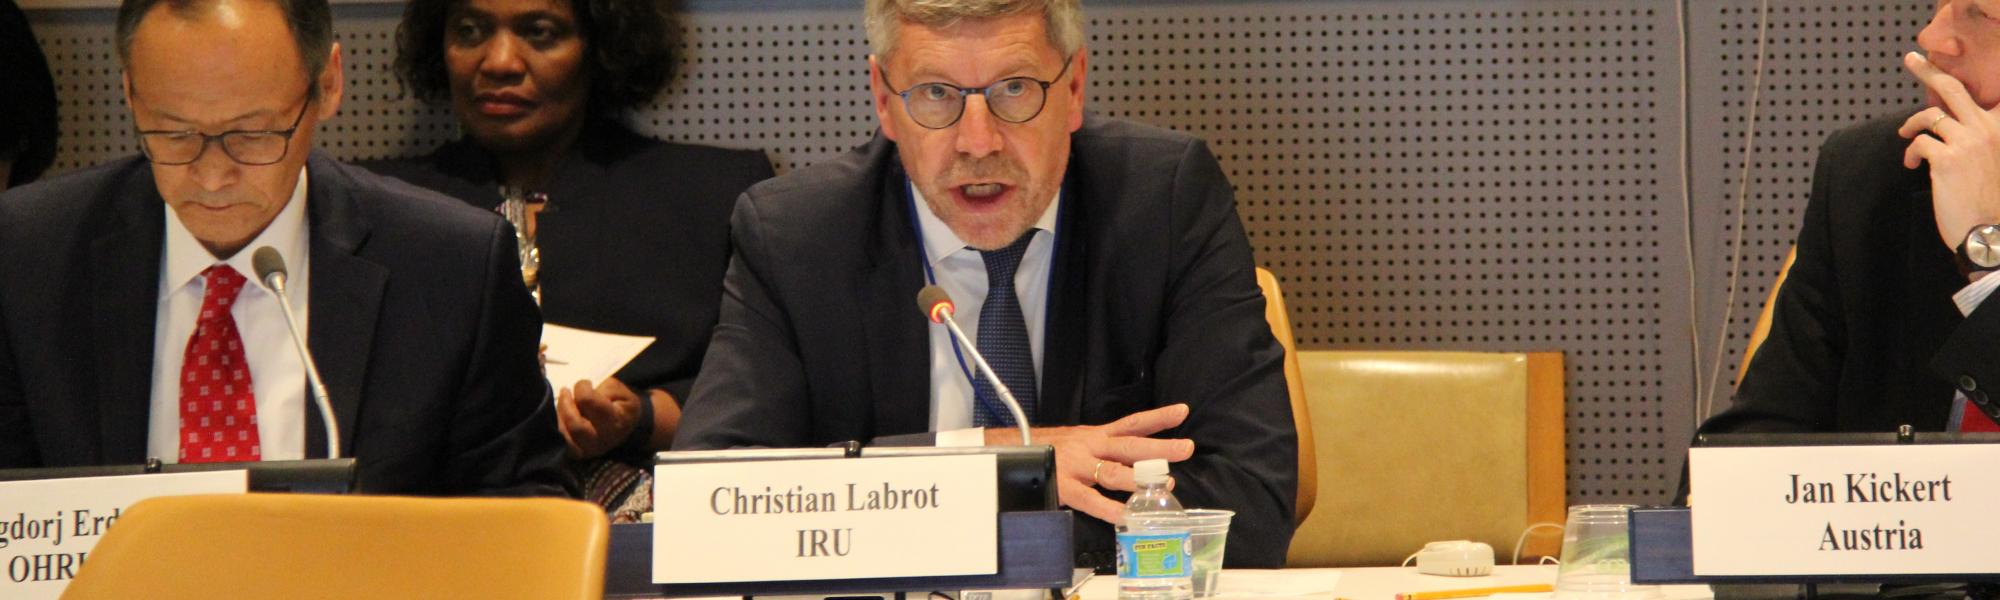 Christian Labrot at ECOSOC event New York